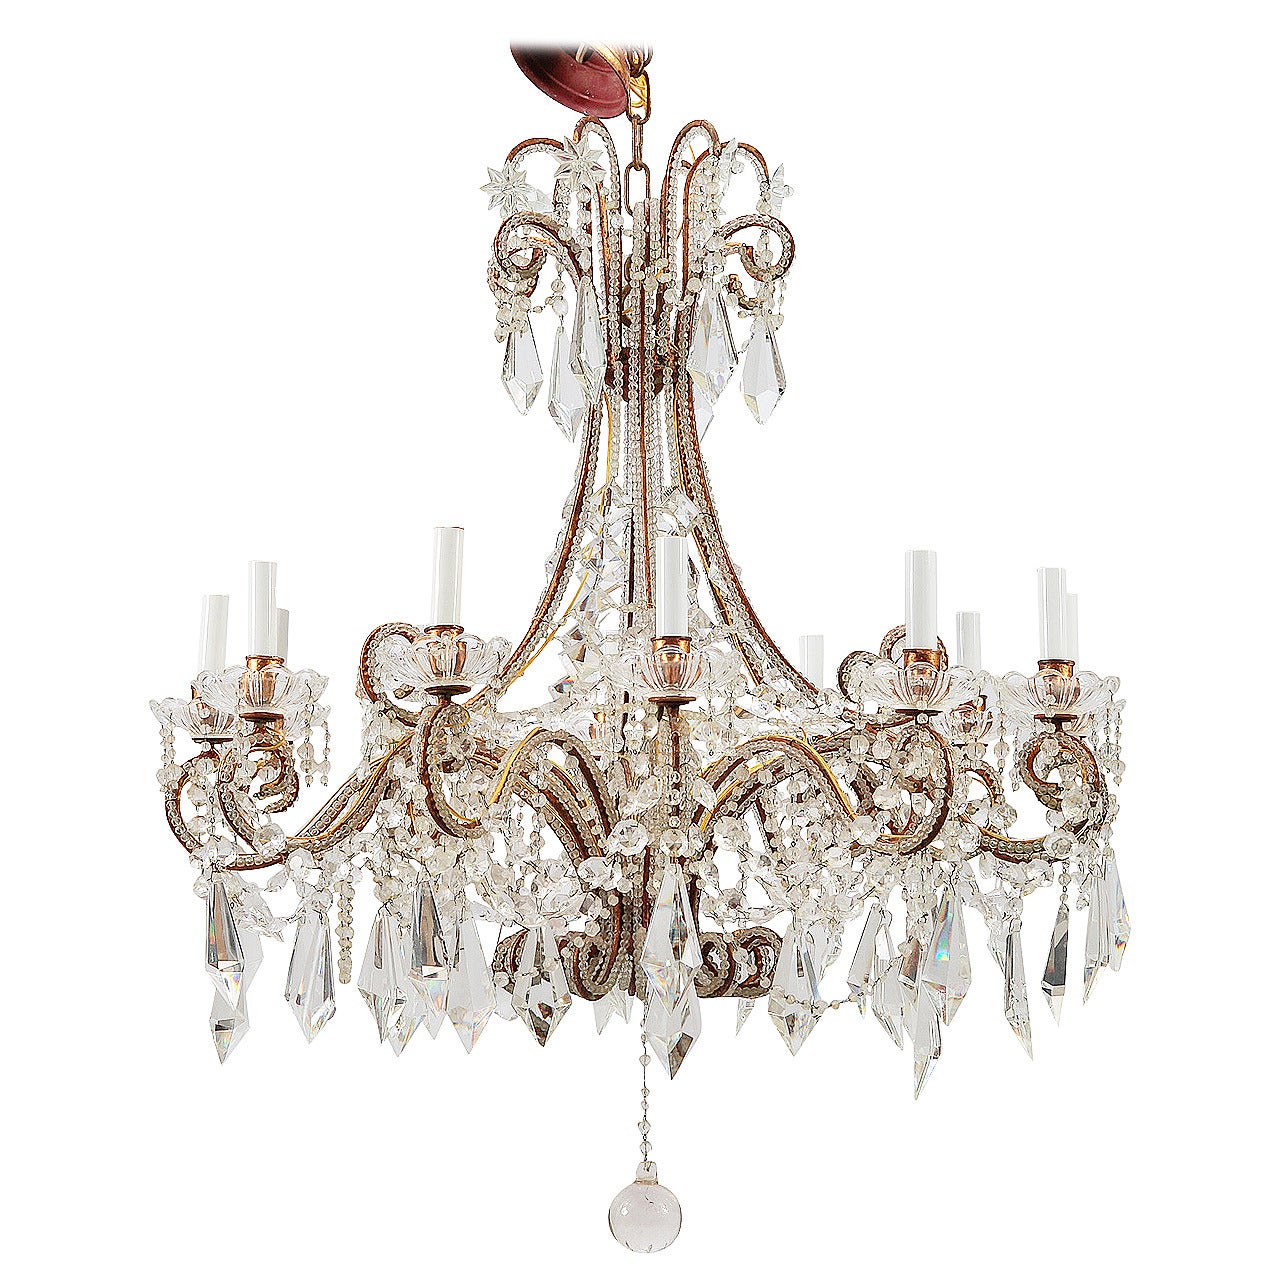 Twelve-Light Italian Crystal Chandelier with Large Drops and Lots of Beading